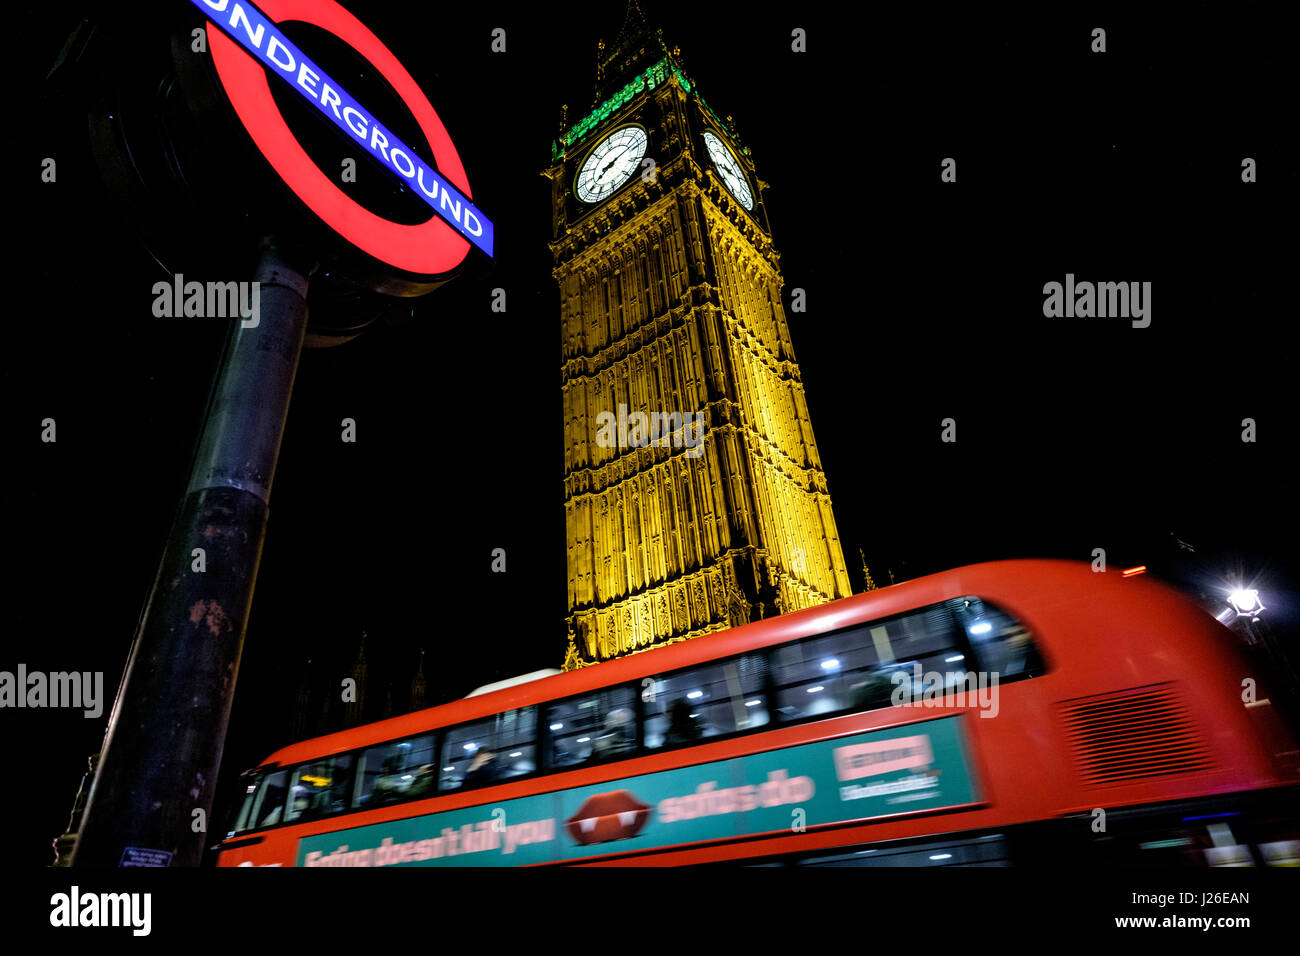 Public transport in London - Bus passing by an Underground station sign and the Big Ben Stock Photo